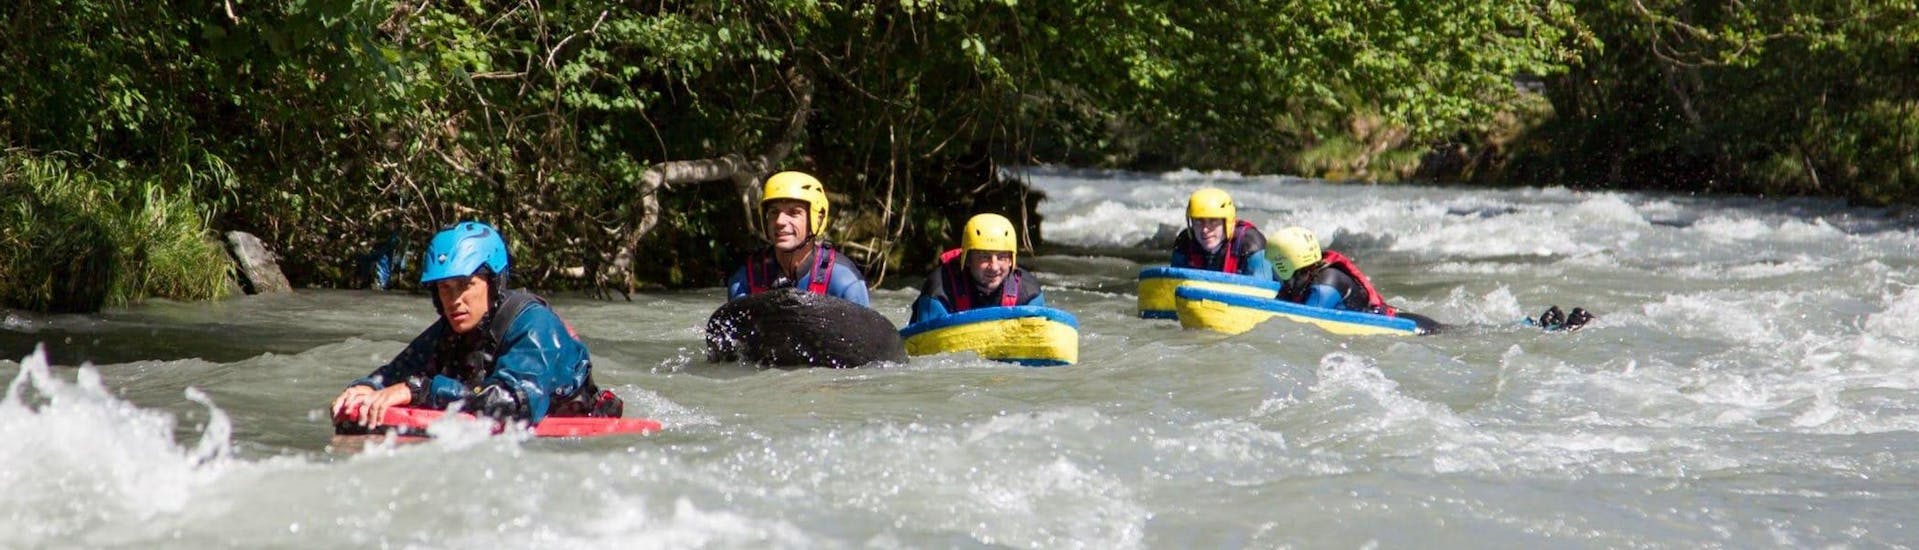 A groupe is having fun during their Hydrospeed on Isère River - Gorges Course activity with Franceraft.